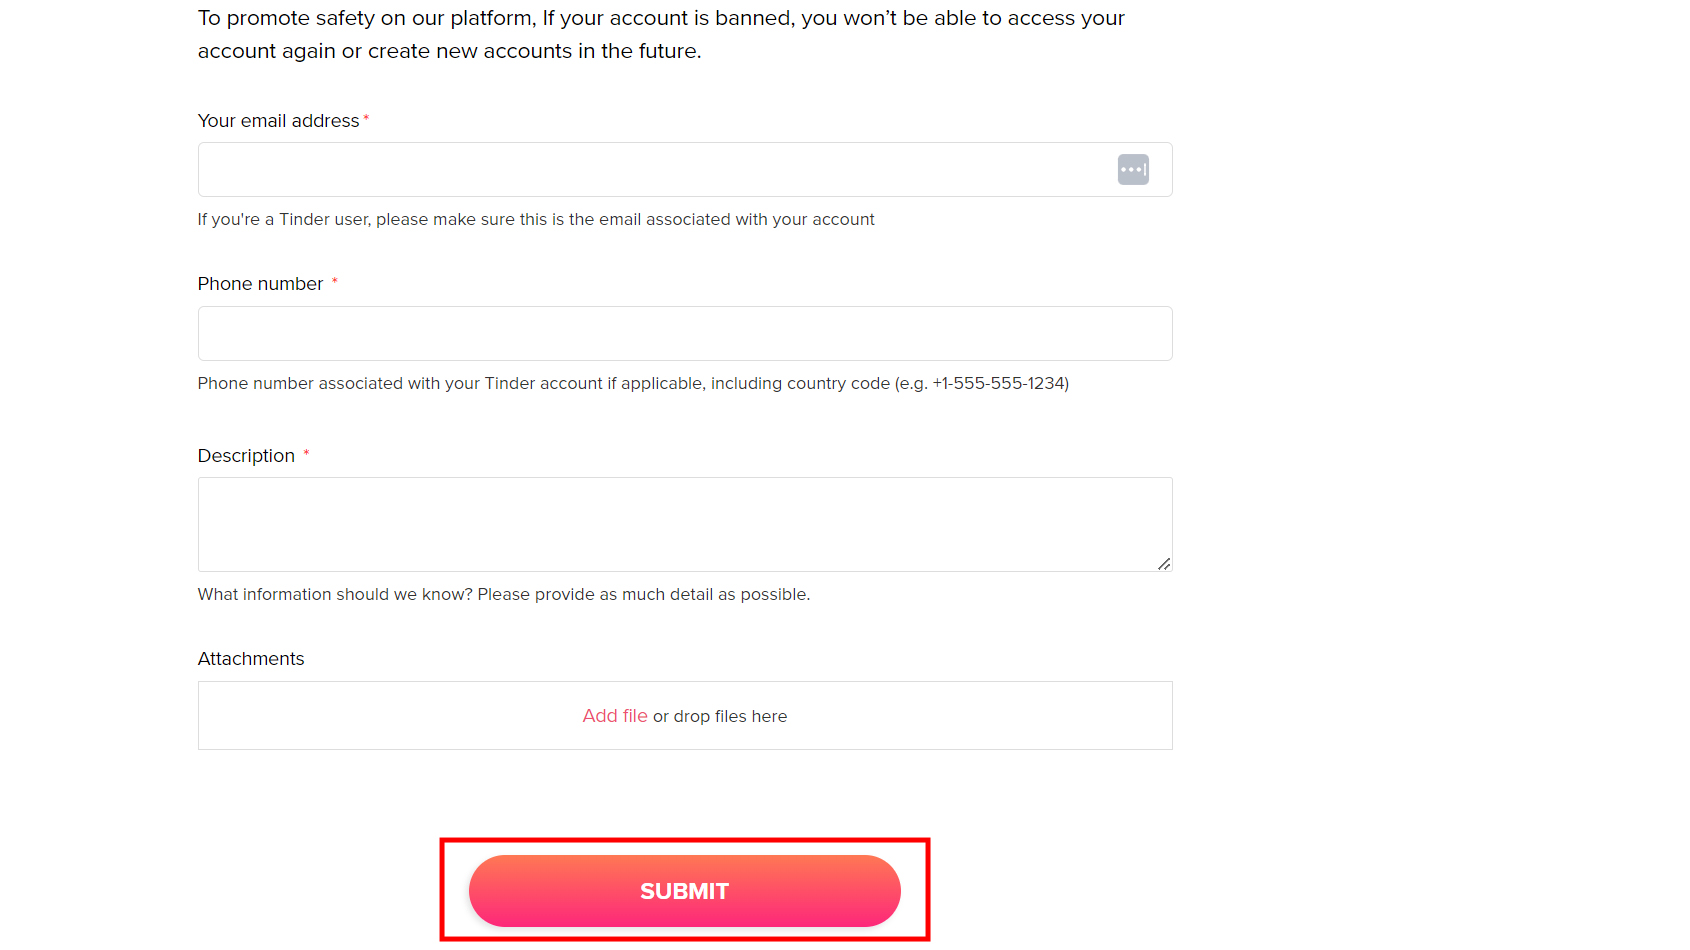 How to submit a Tinder request to get account unbanned (3)